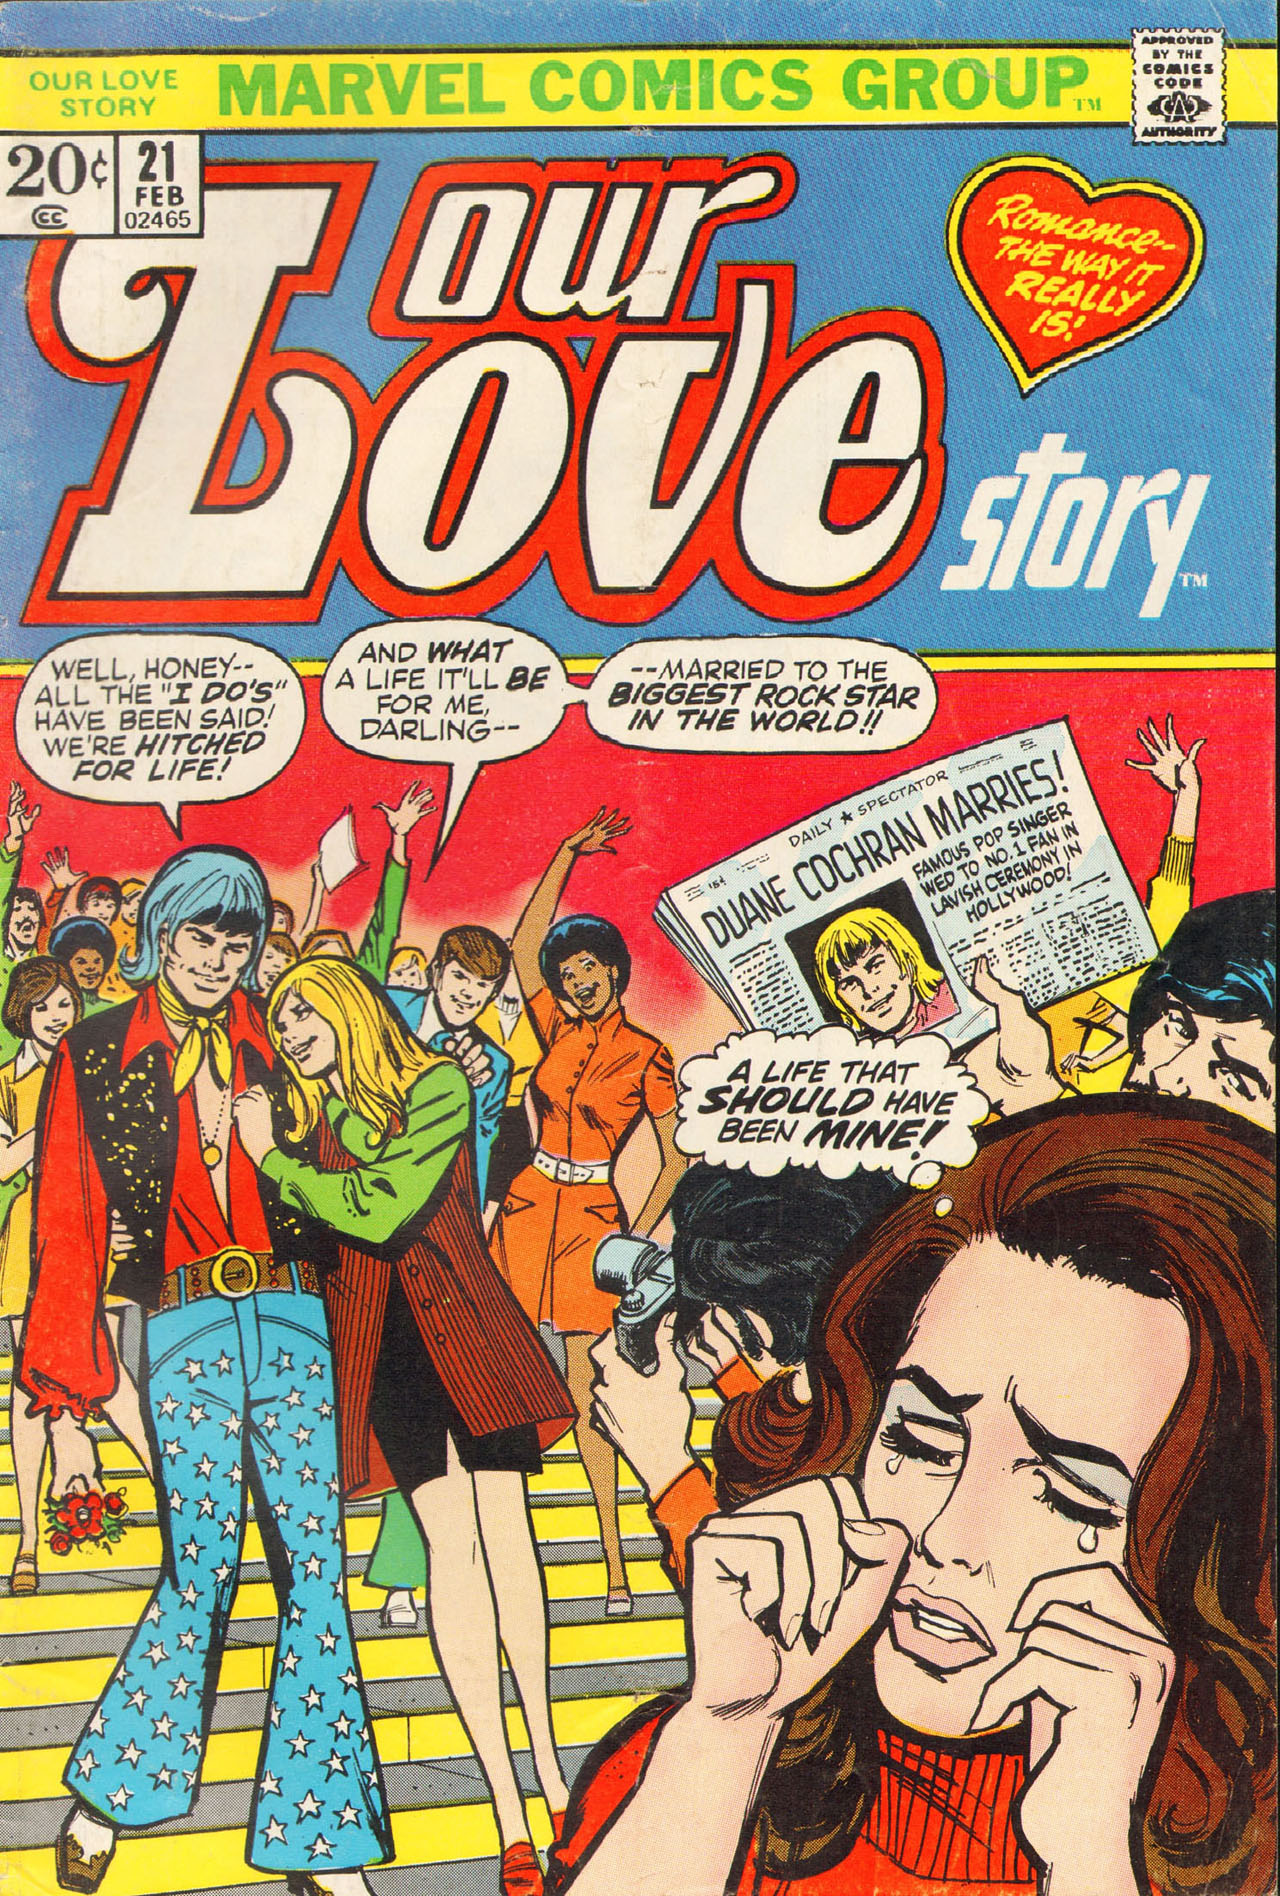 Read online Our Love Story comic -  Issue #21 - 1